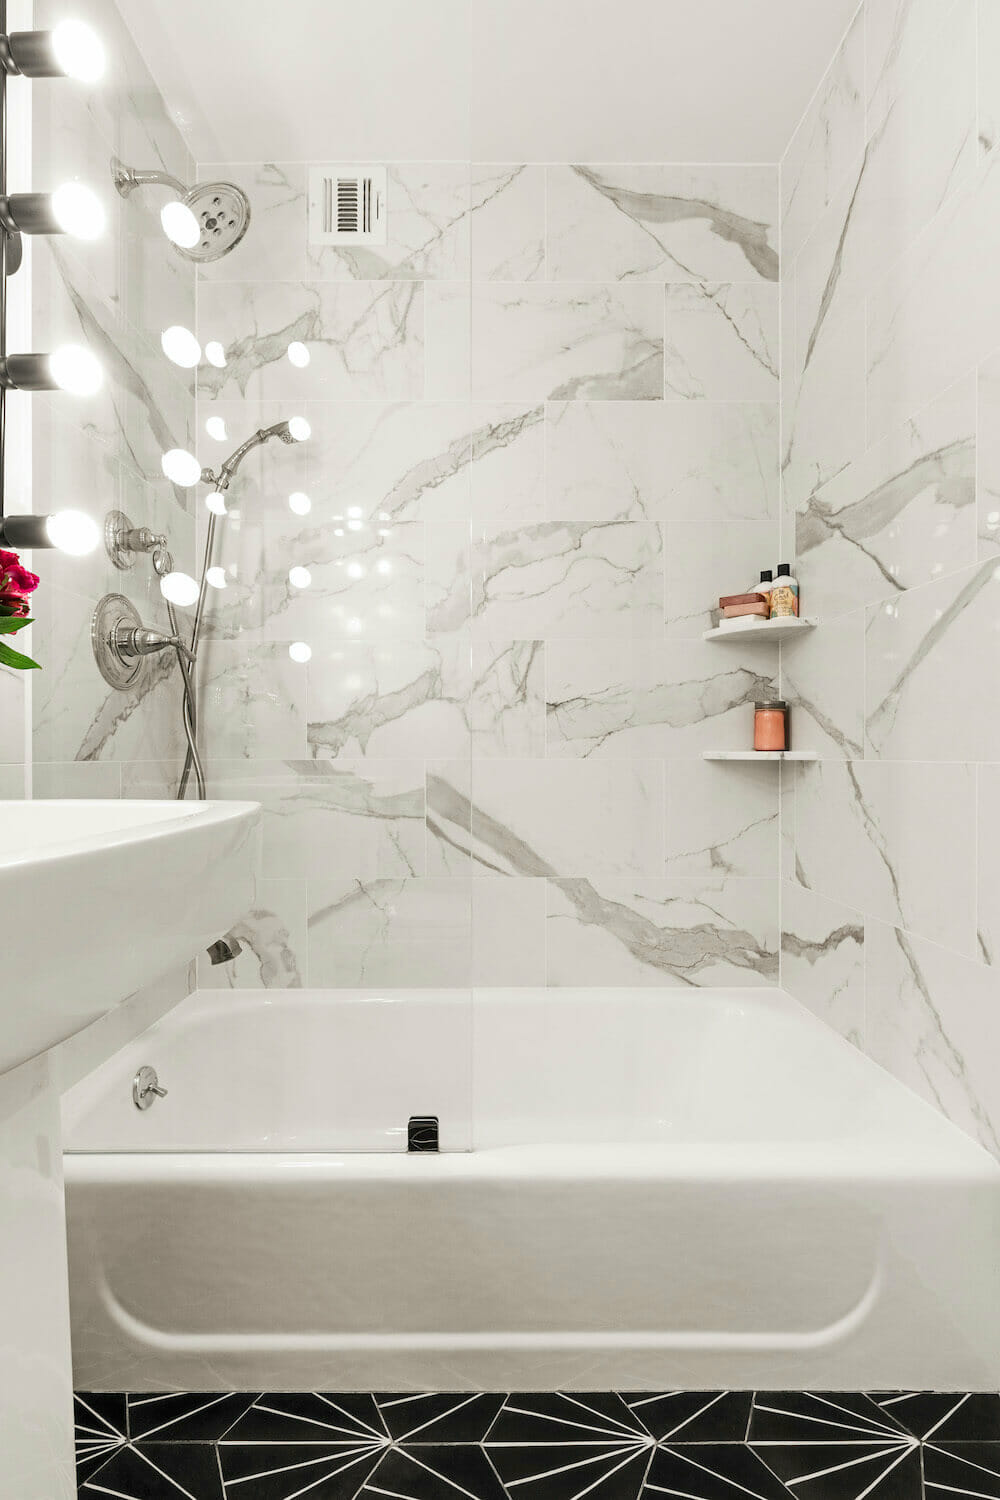 Image of a bathtub with Calacatta marble walls